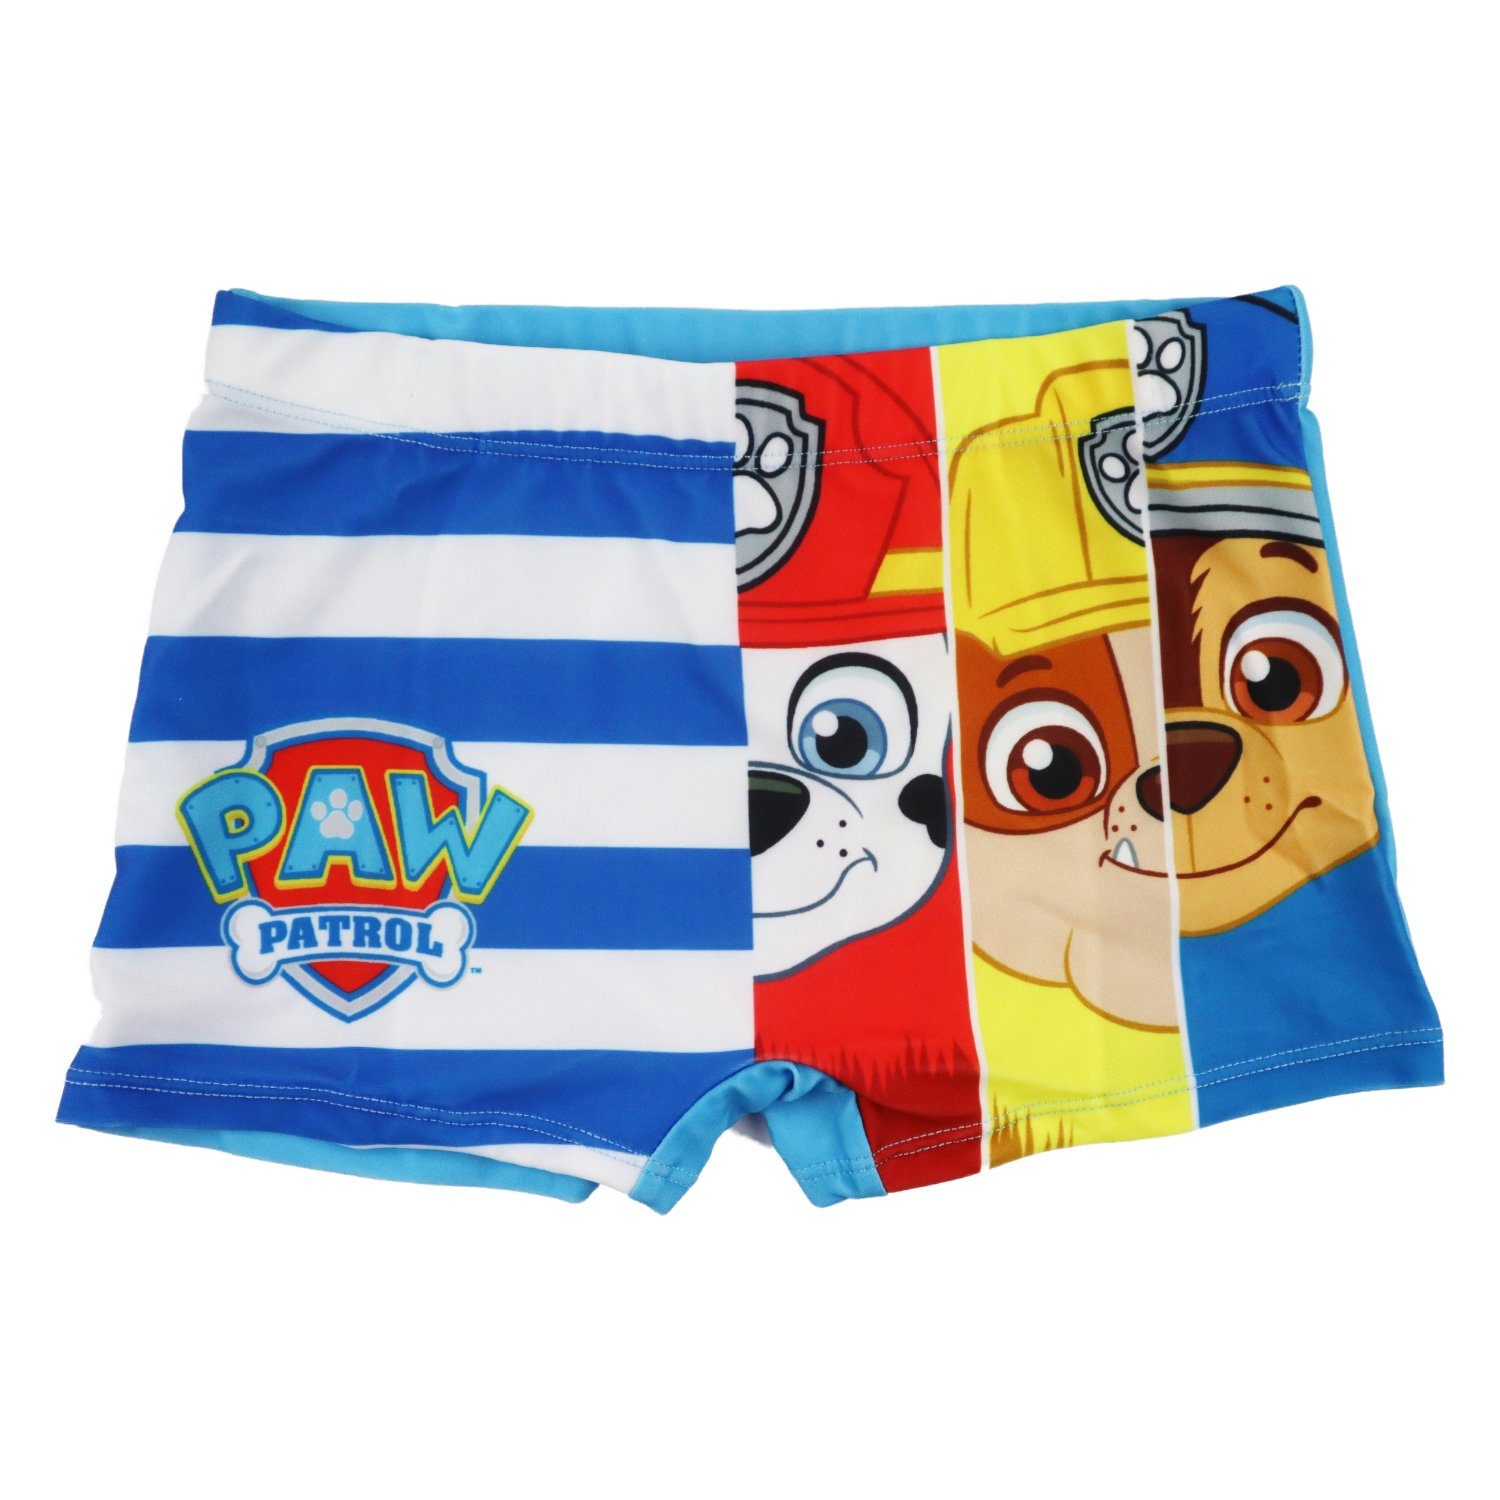 Kinder Marshall Patrol PAW Badehose Gr. Jungen Paw 128 PATROL 98 Chase Rubble Schwimmhose bis